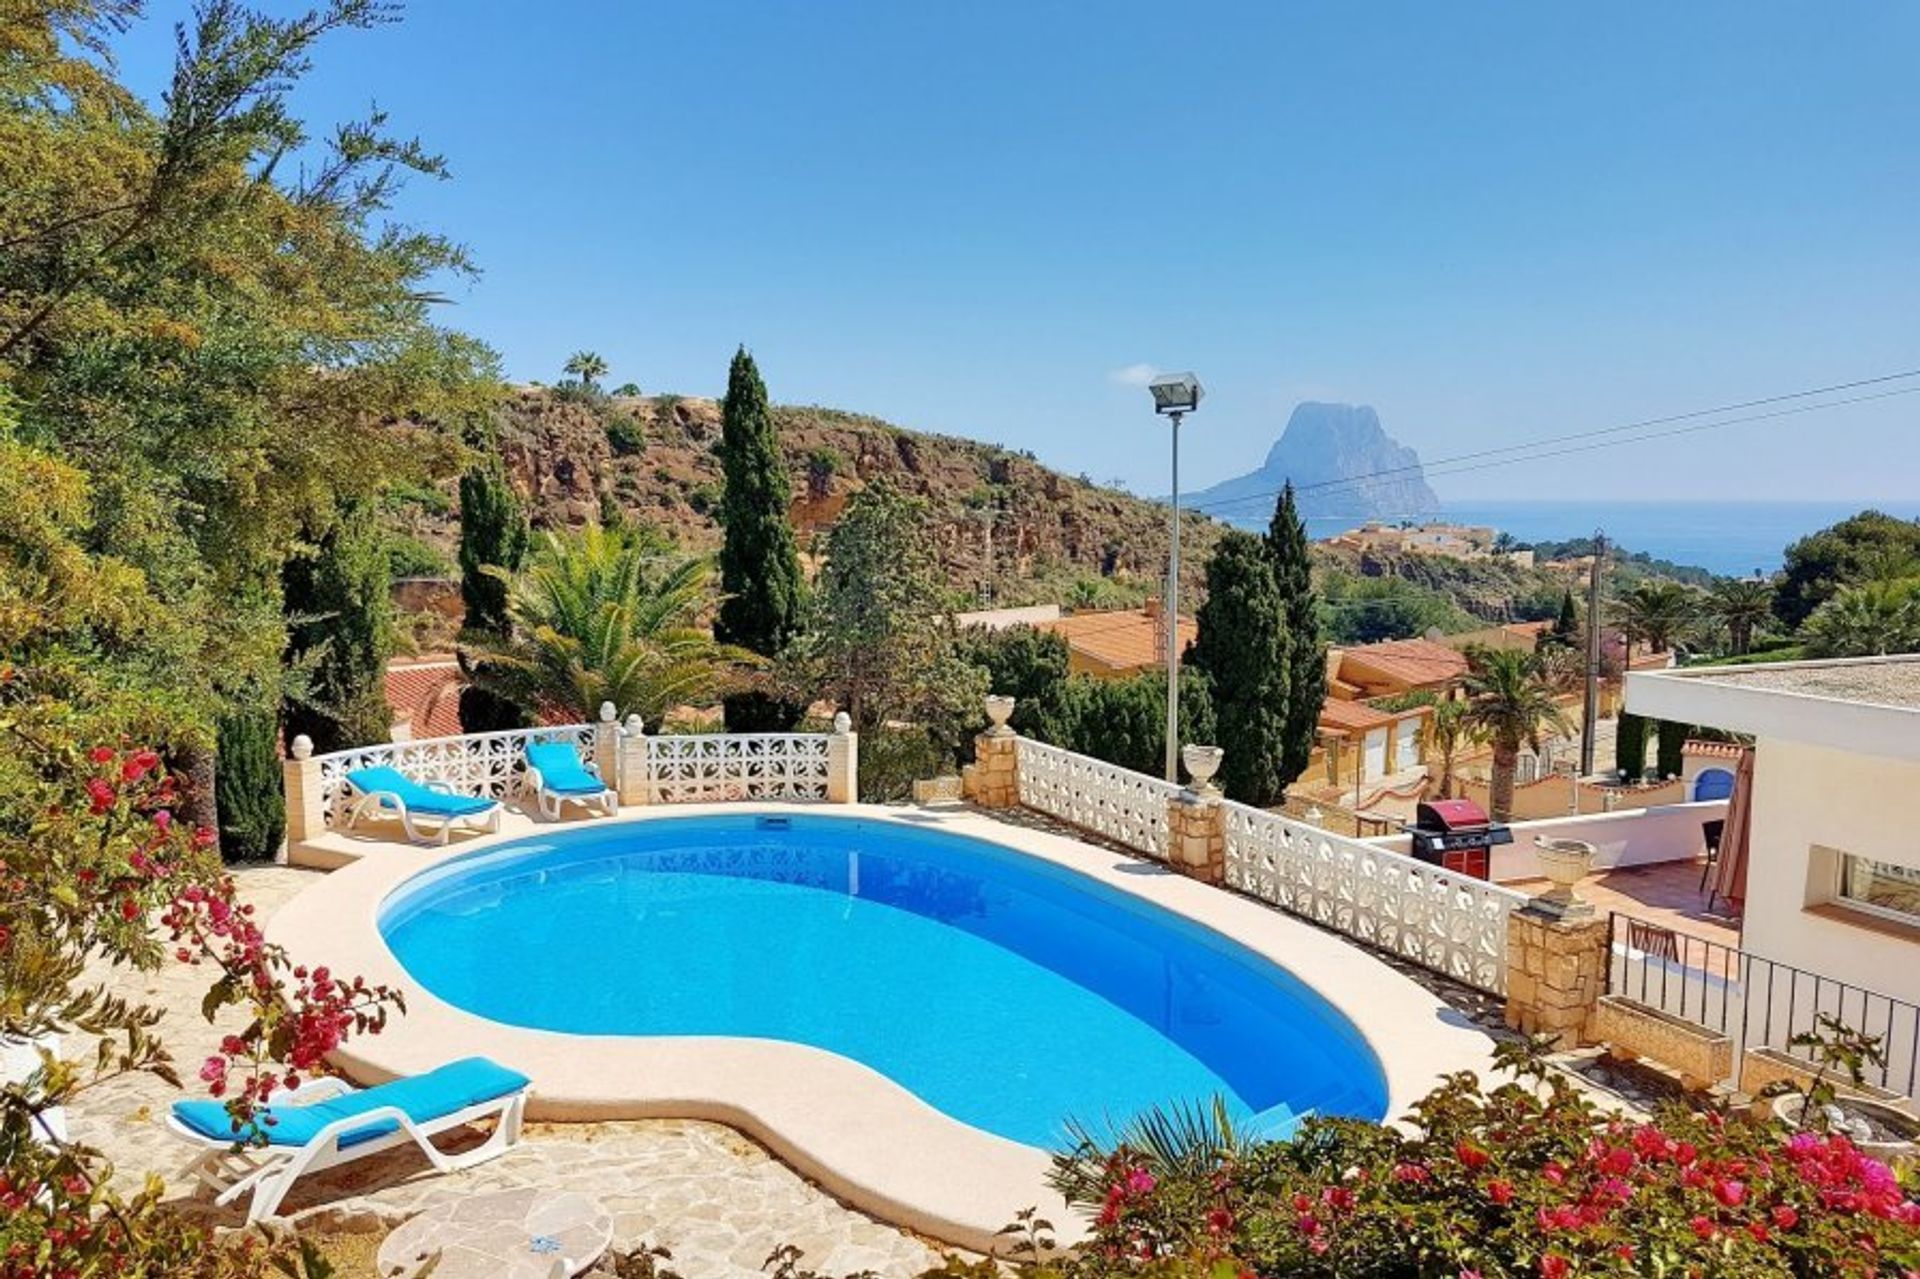 We offer a fantastic choice of holiday rentals with private pools and pretty views